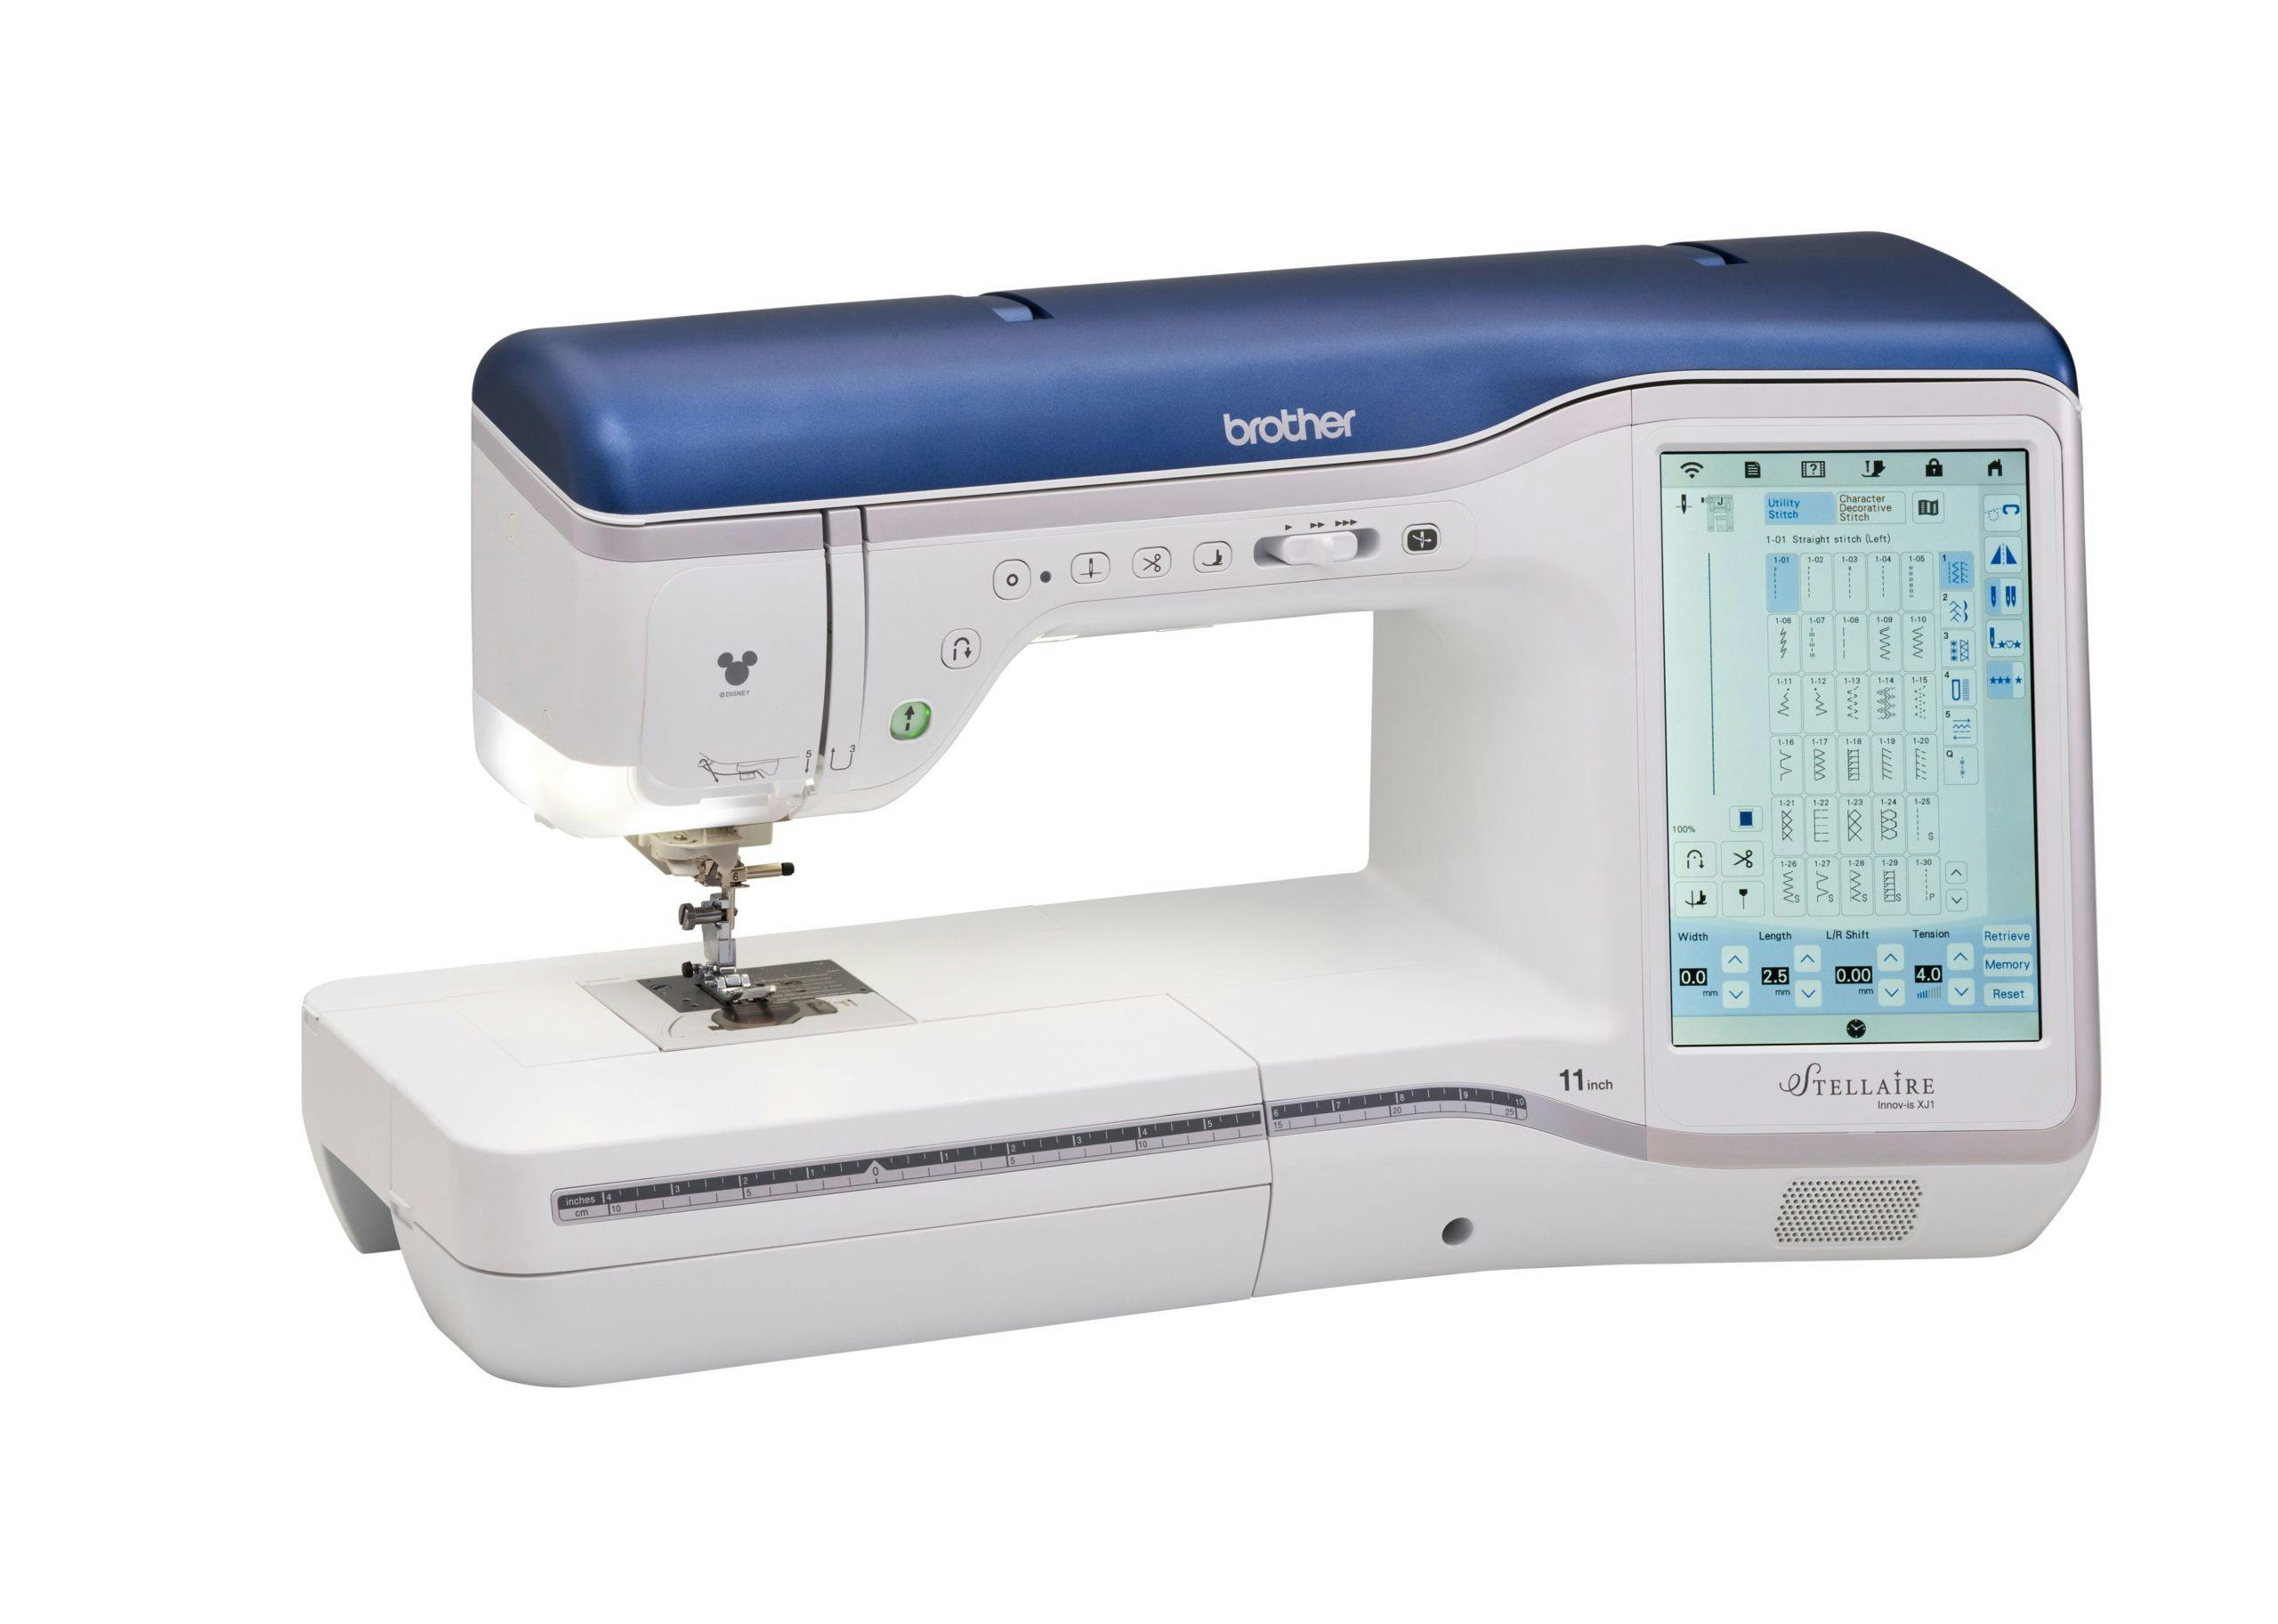 Photo of the Brother Stellaire XJ1 sewing and embroidery only machine